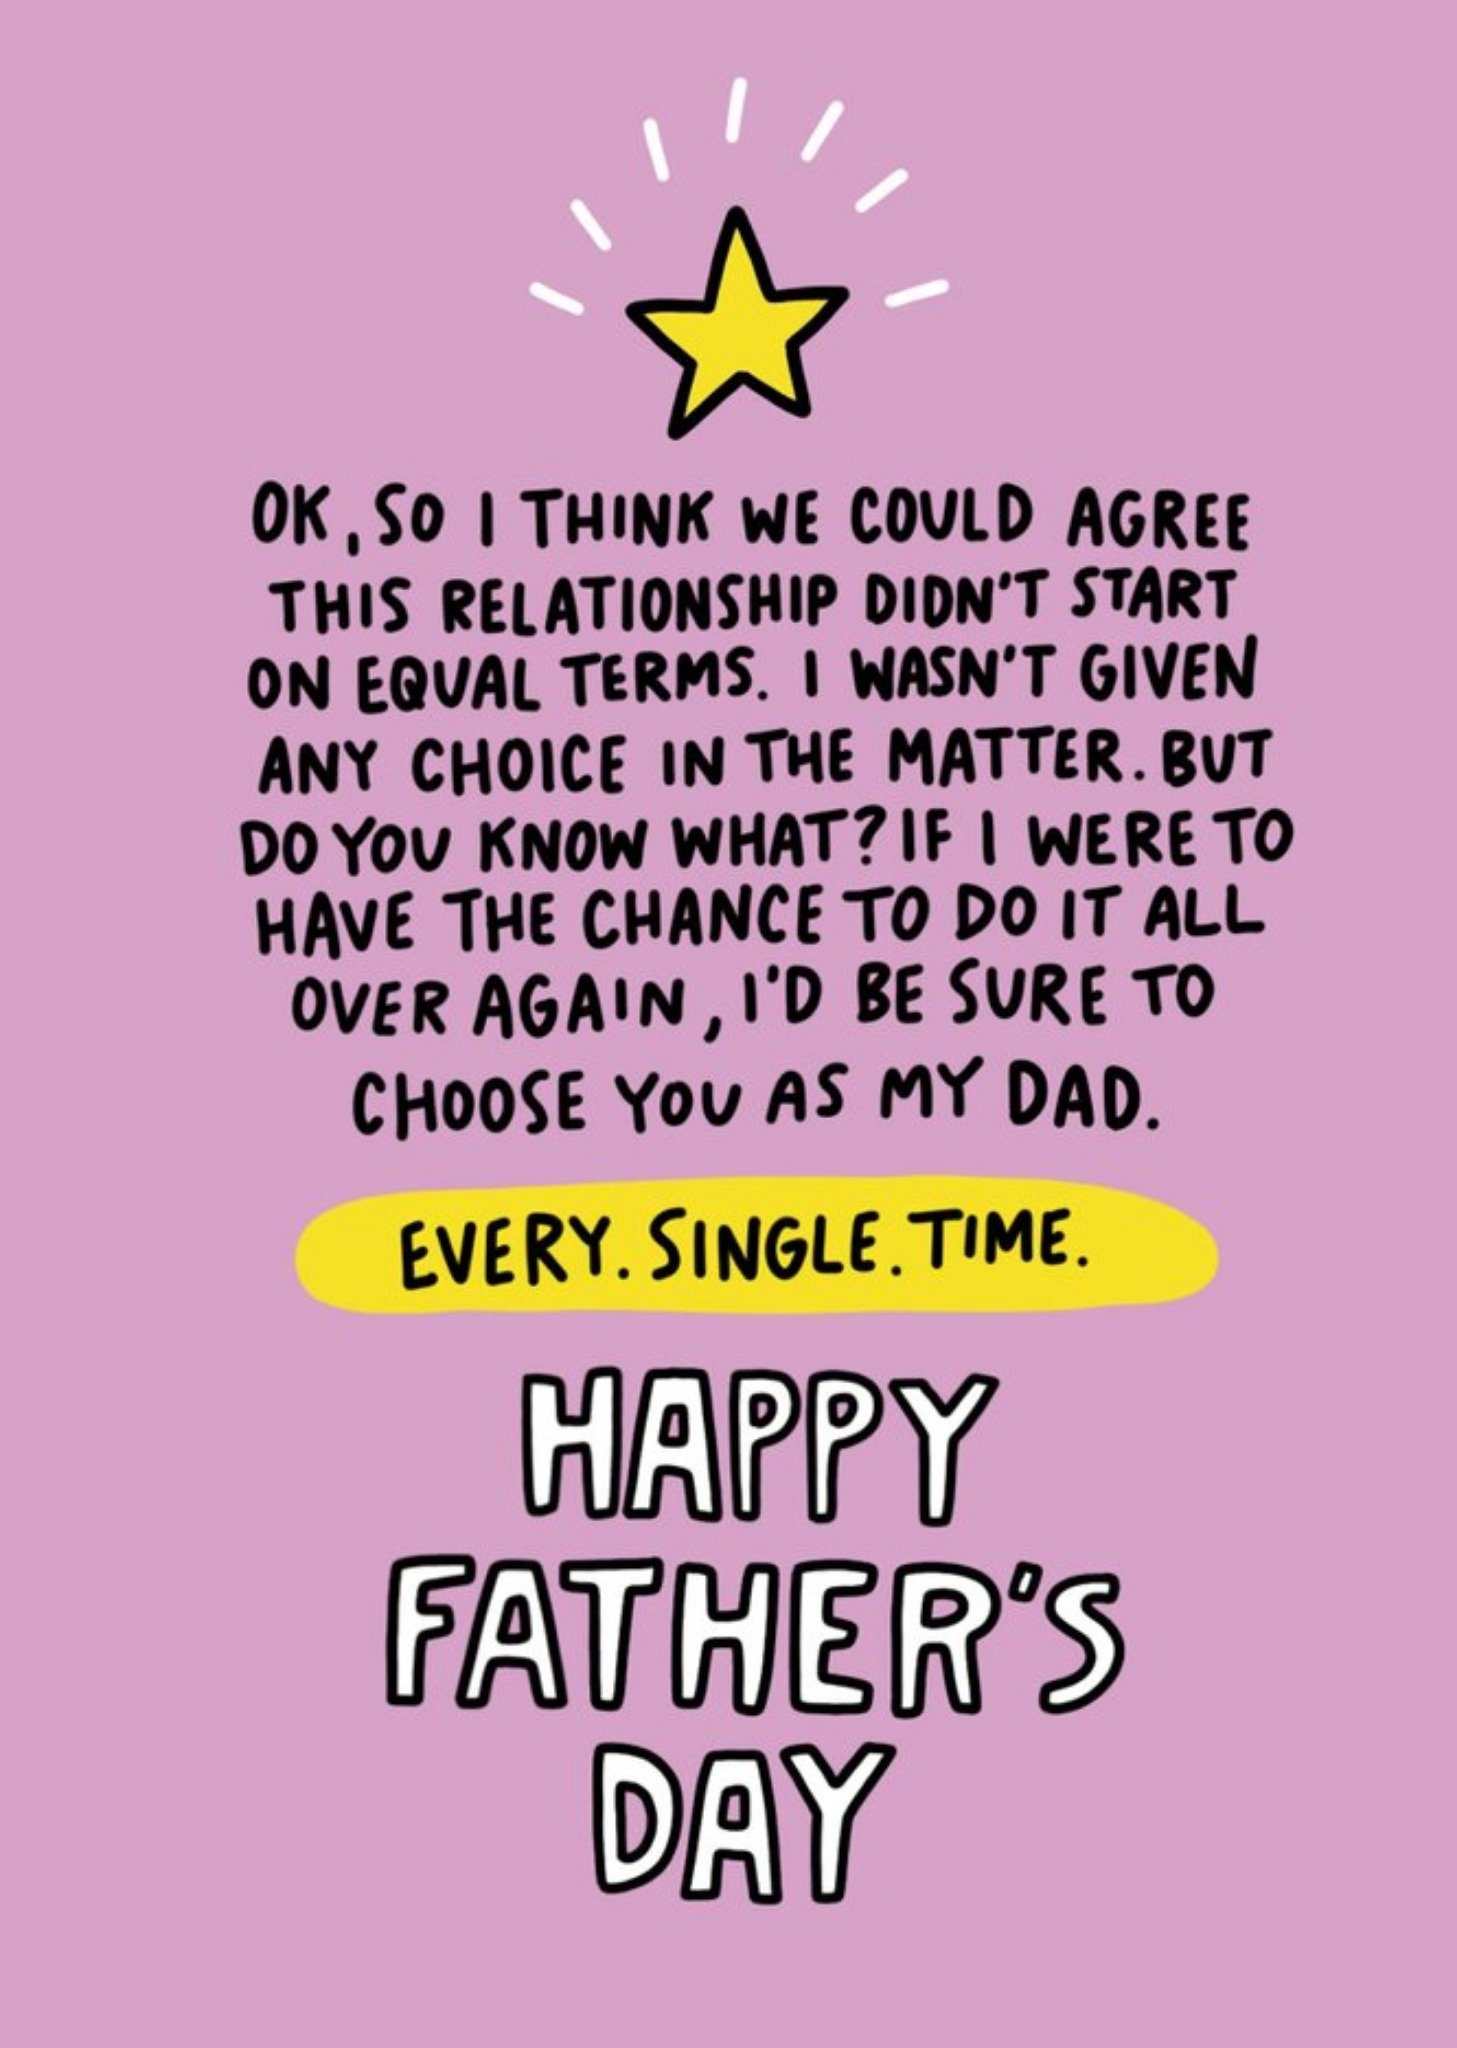 Moonpig Angela Chick Choose You Sentimental Father's Day Card Ecard